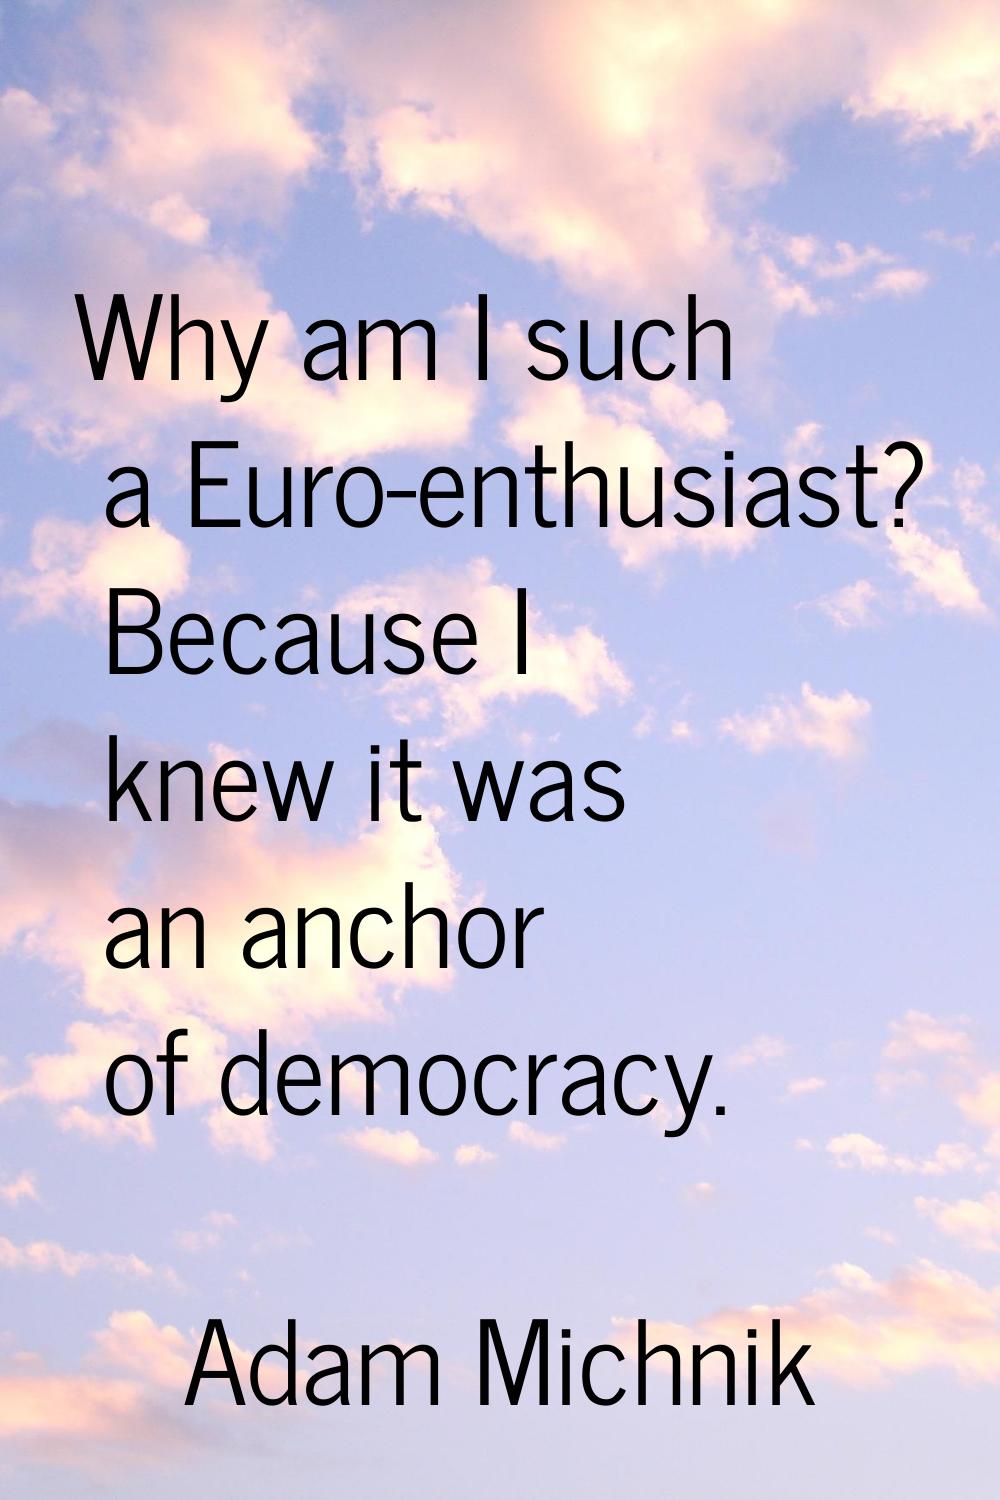 Why am I such a Euro-enthusiast? Because I knew it was an anchor of democracy.